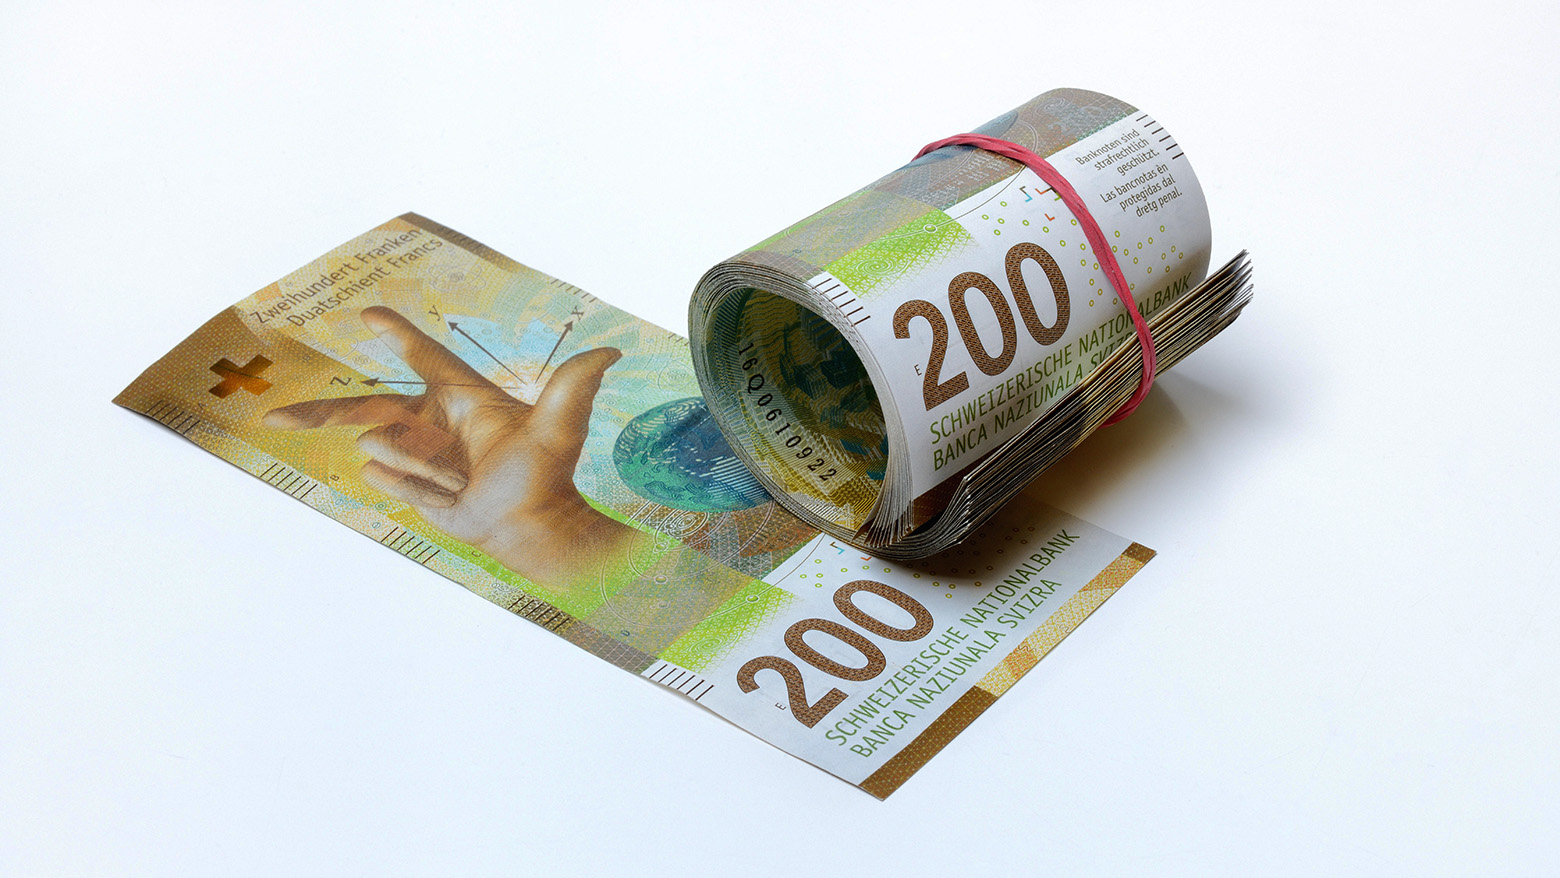 Rolled-in banknotes next to a 200 note.